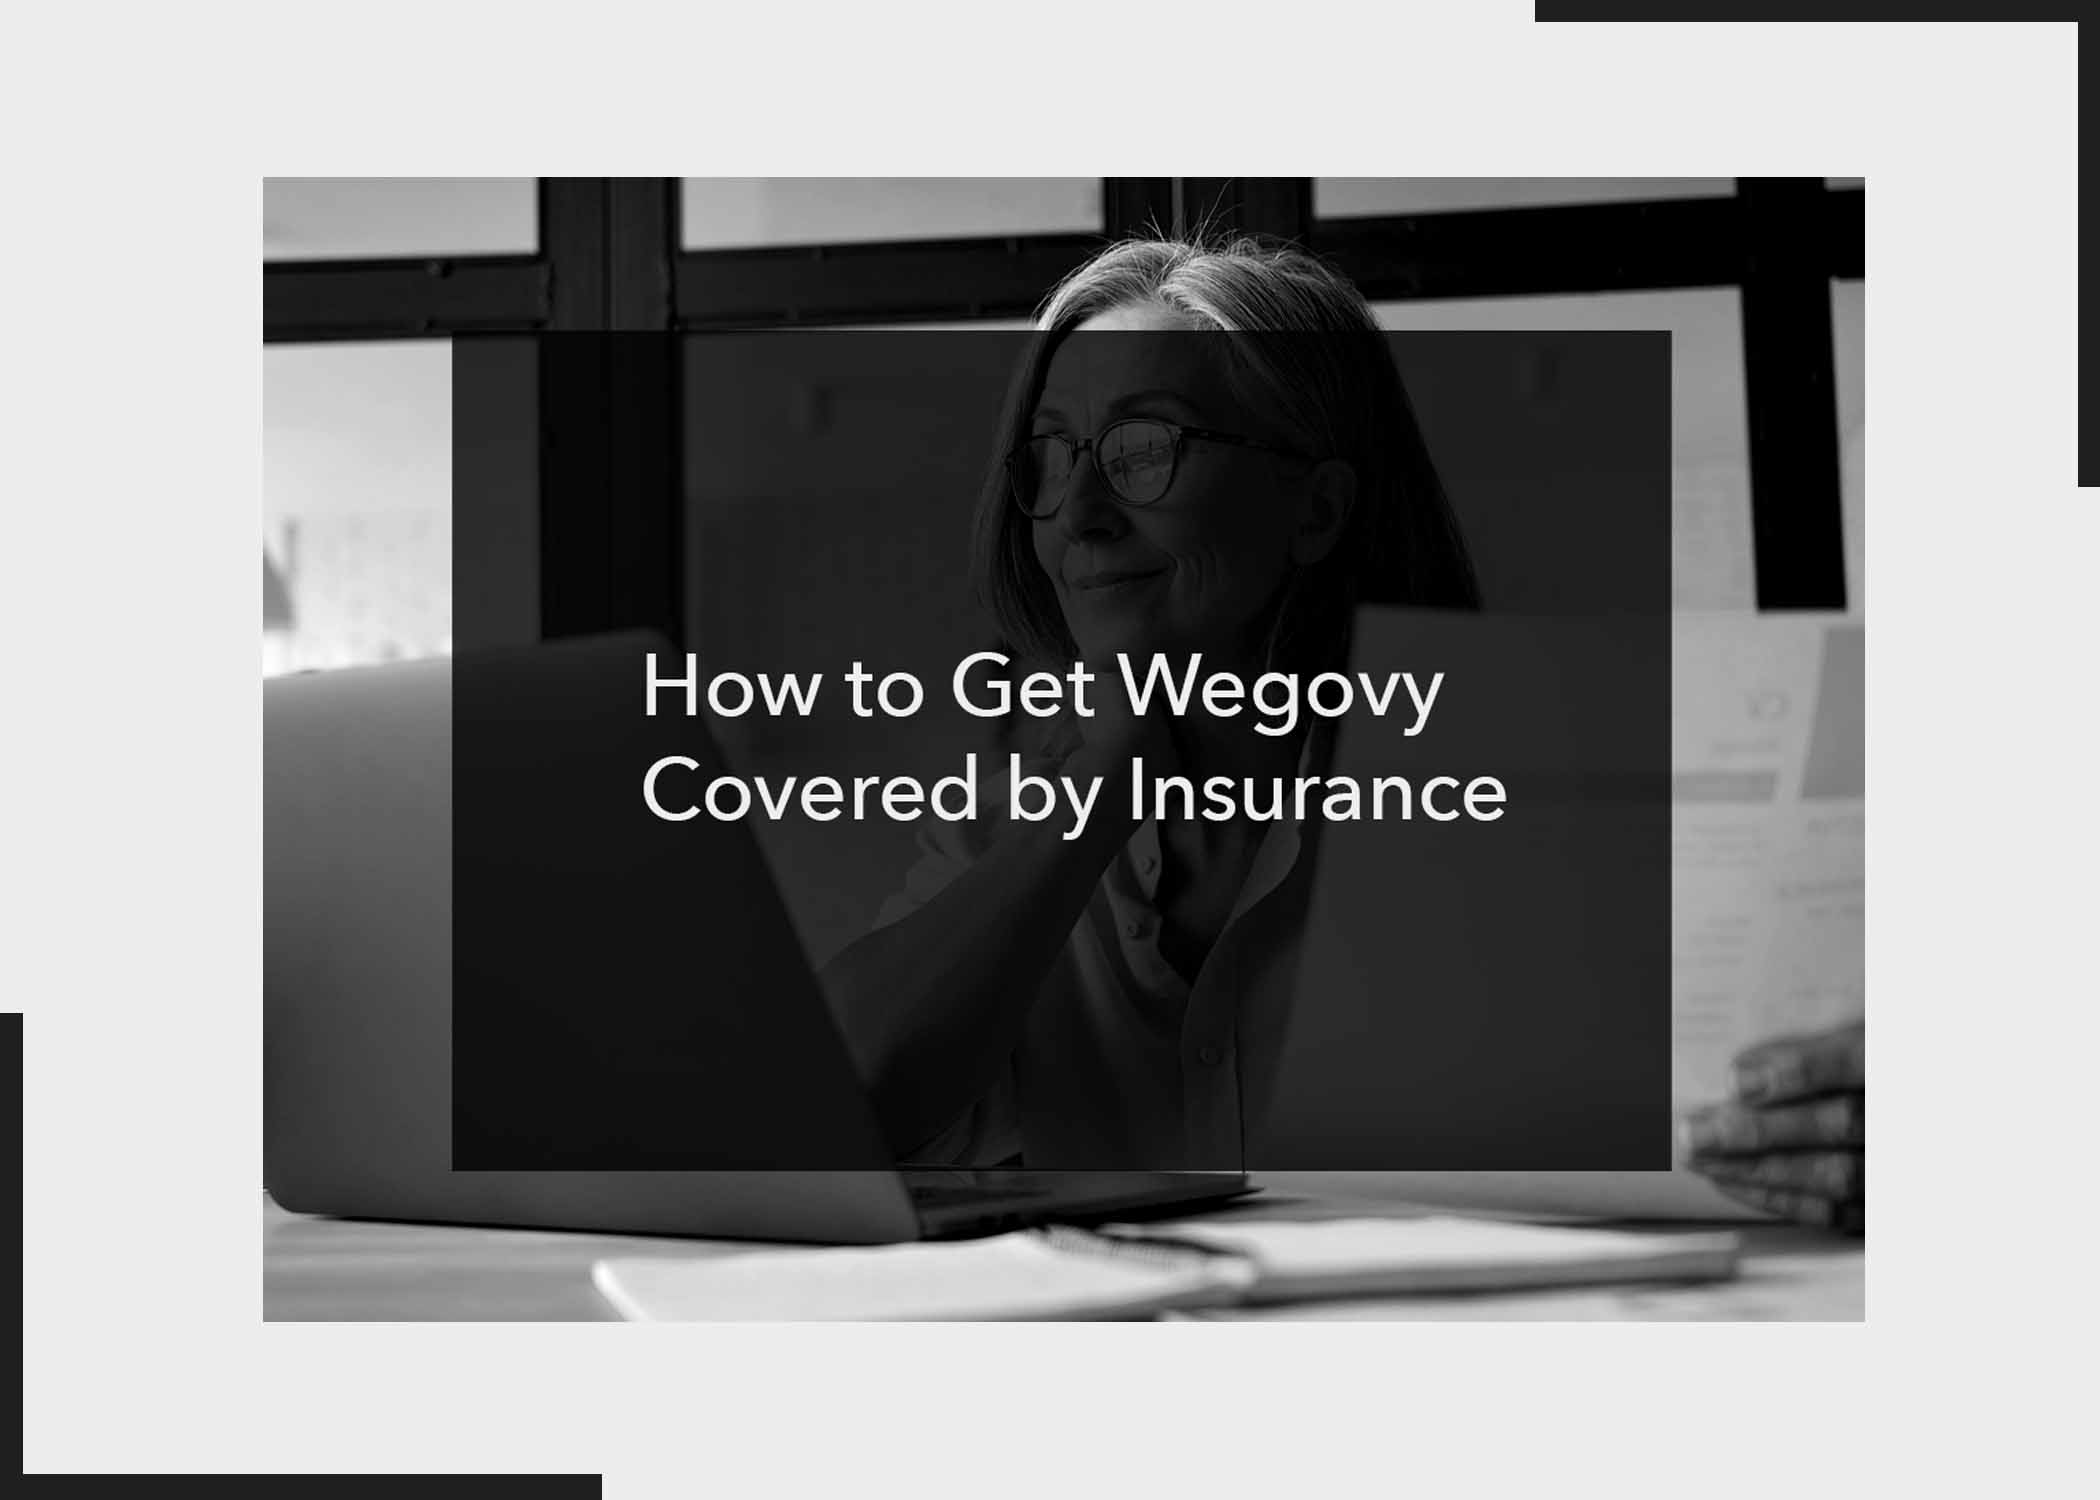 How to Get Wegovy Covered by Insurance